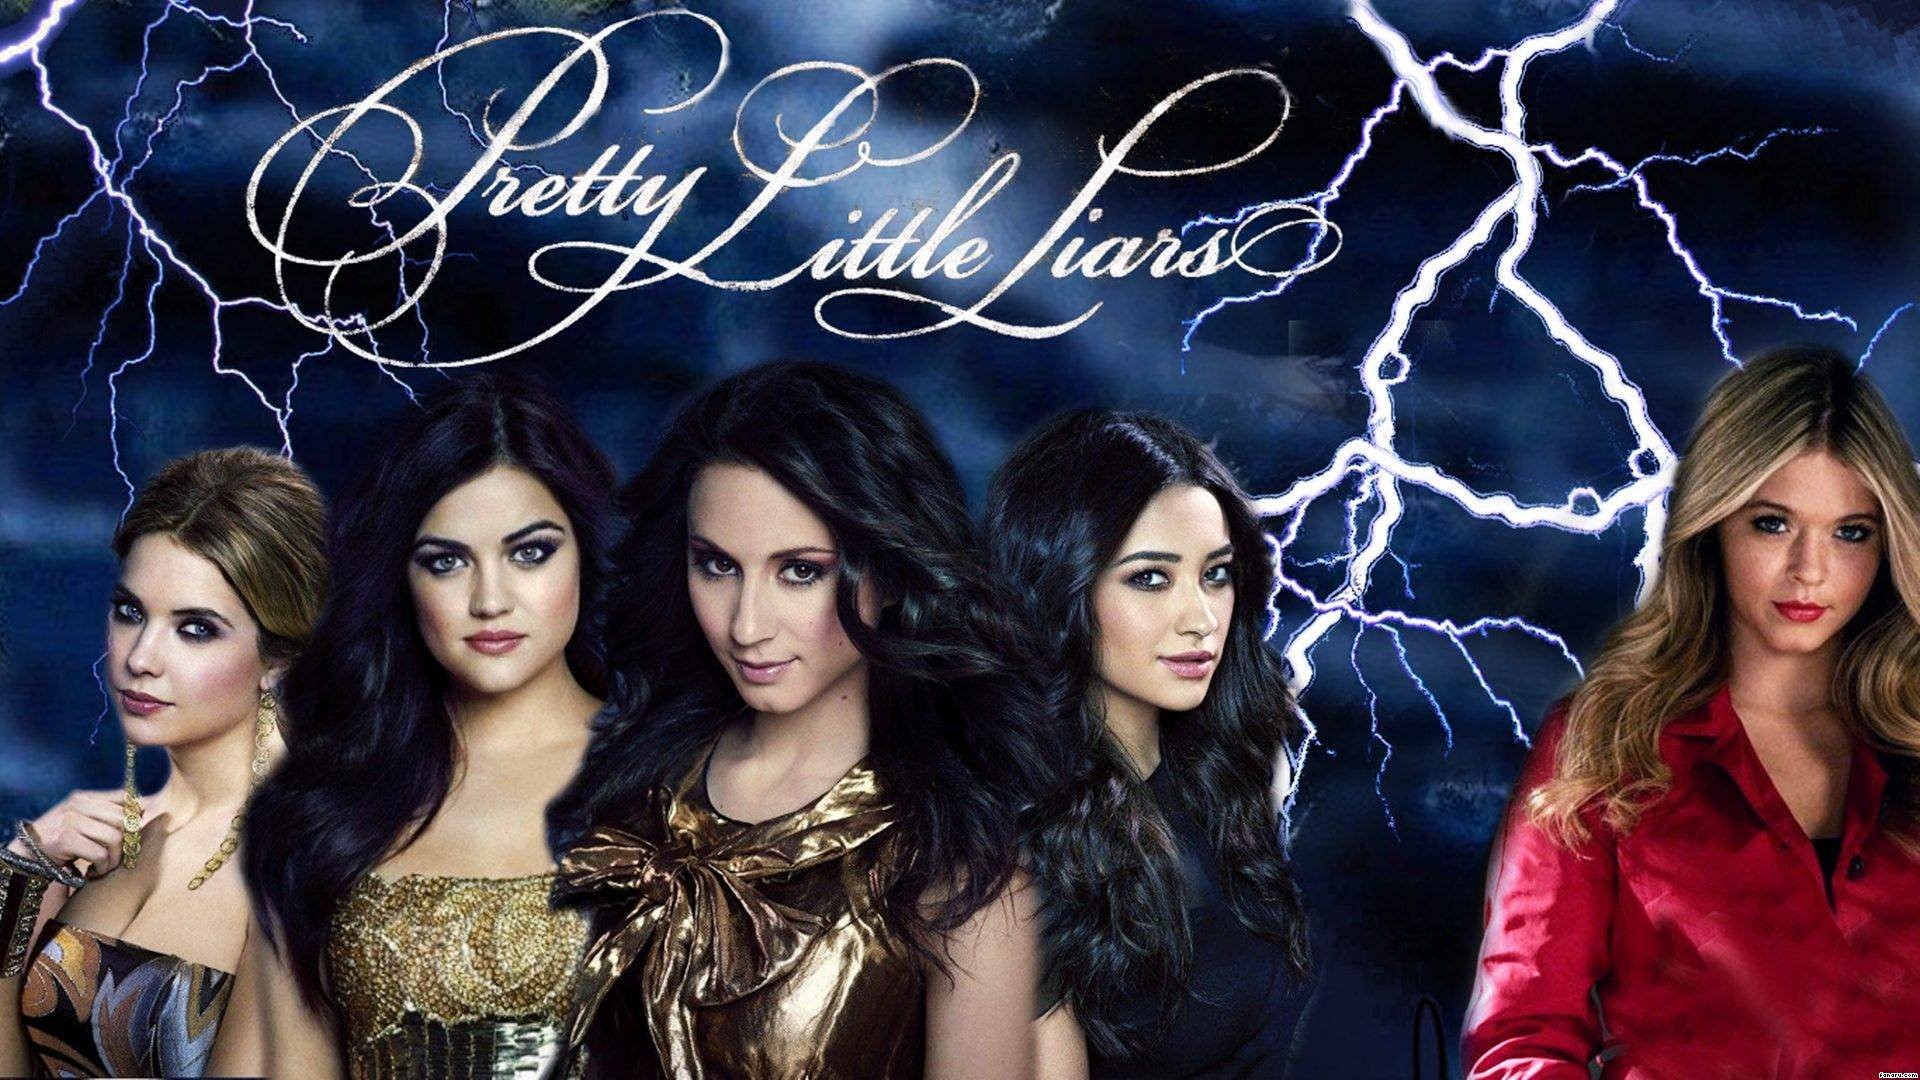 1920x1080 PRETTY LITTLE LIARS drama mystery thriller series babe wallpaper |   | 490075 | WallpaperUP